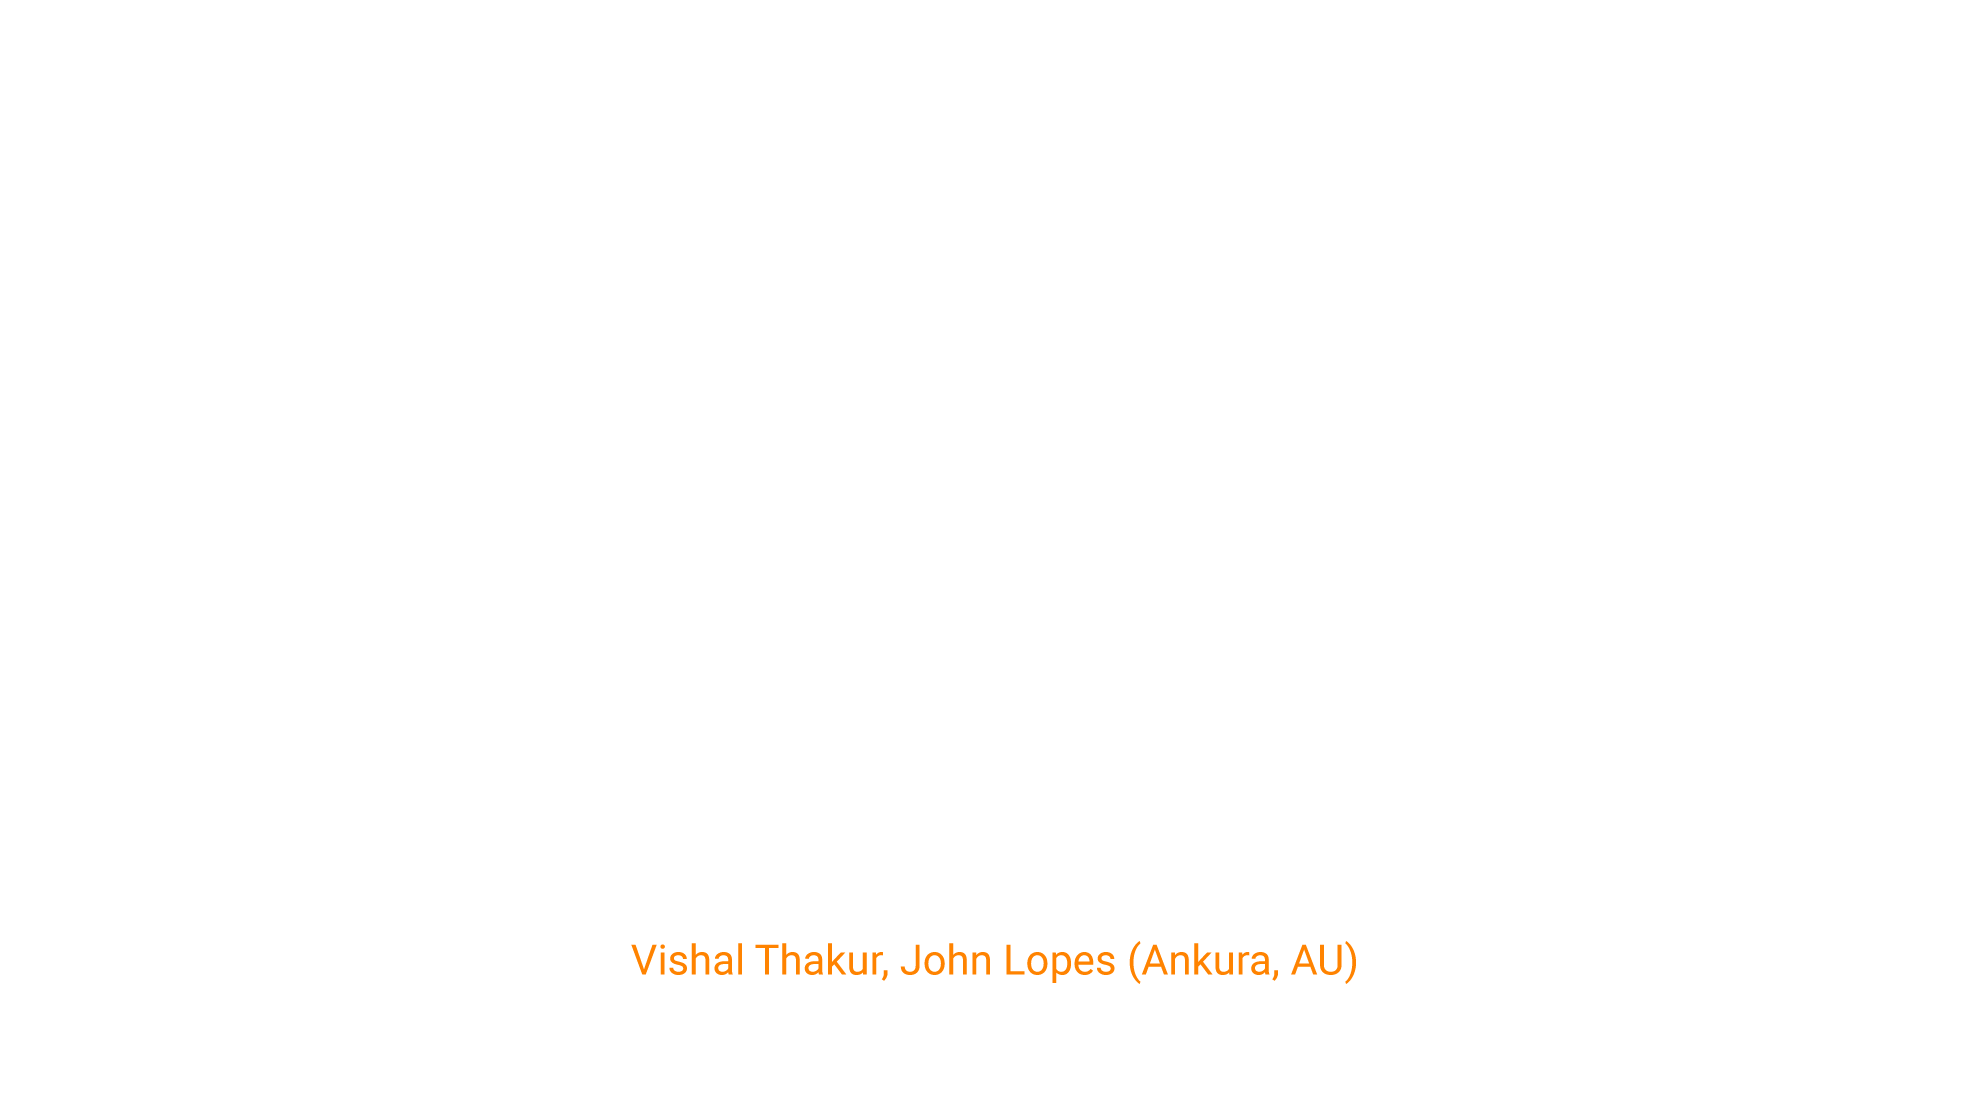 Living with Ransomware - The New Normal in Cyber Security